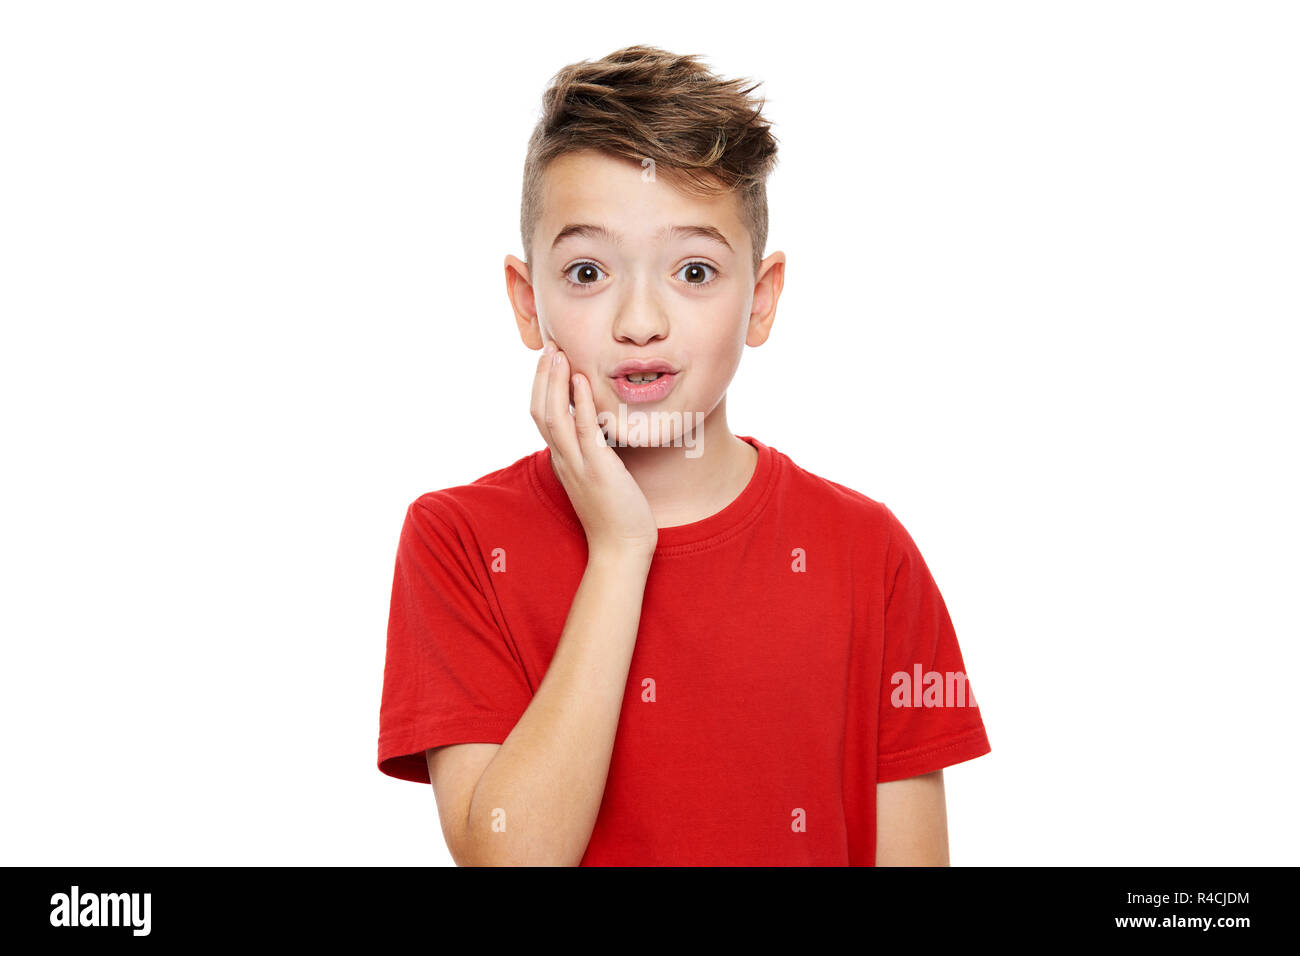 Adorable young boy in shock, isolated over white background. Shocked child looking at camera in disbelief. Shock, amazement, surprise concept. Stock Photo